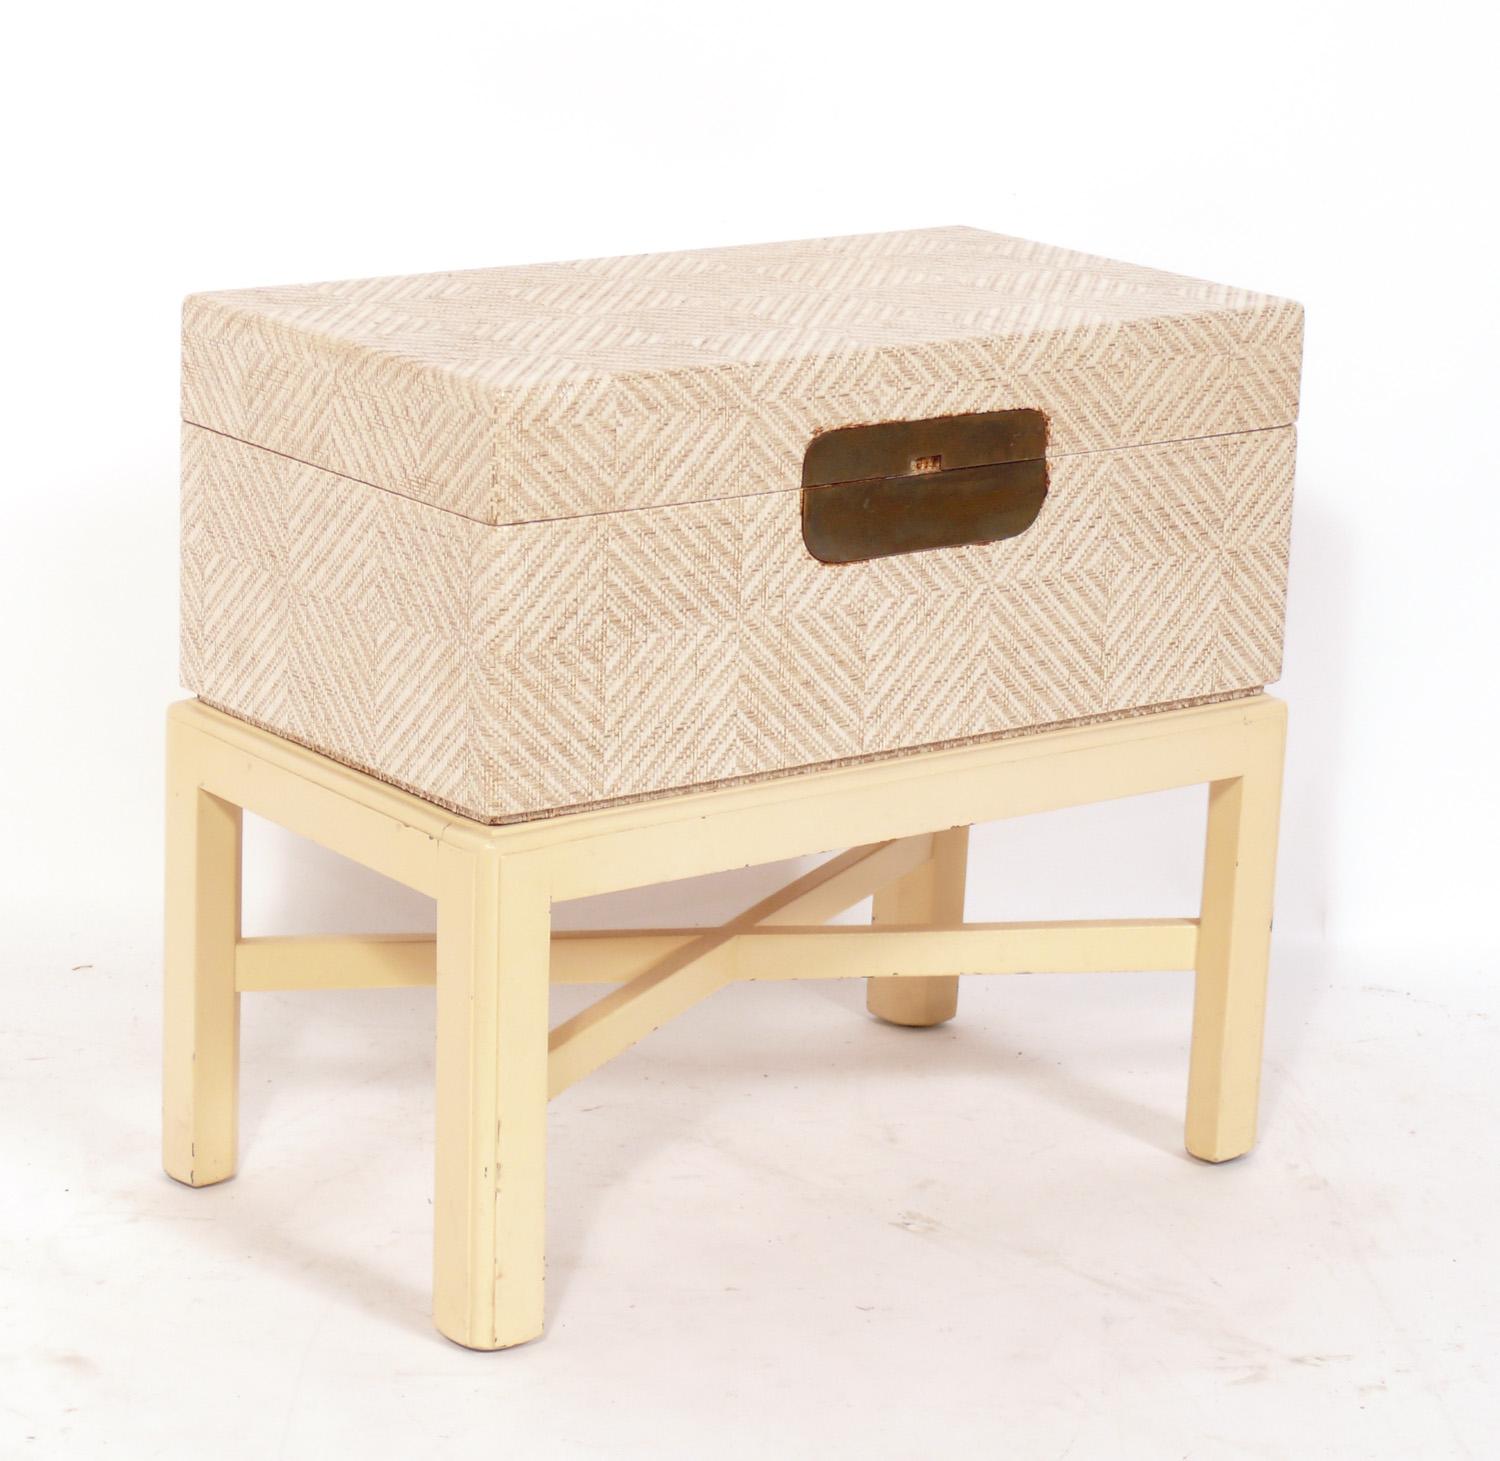 Elegant Lacquered raffia box on stand, in the manner of Karl Springer, American, circa 1970s. It is a versatile size and can be used as an end or side table, or as a night stand. No key is included, but the box is unlocked and opens.